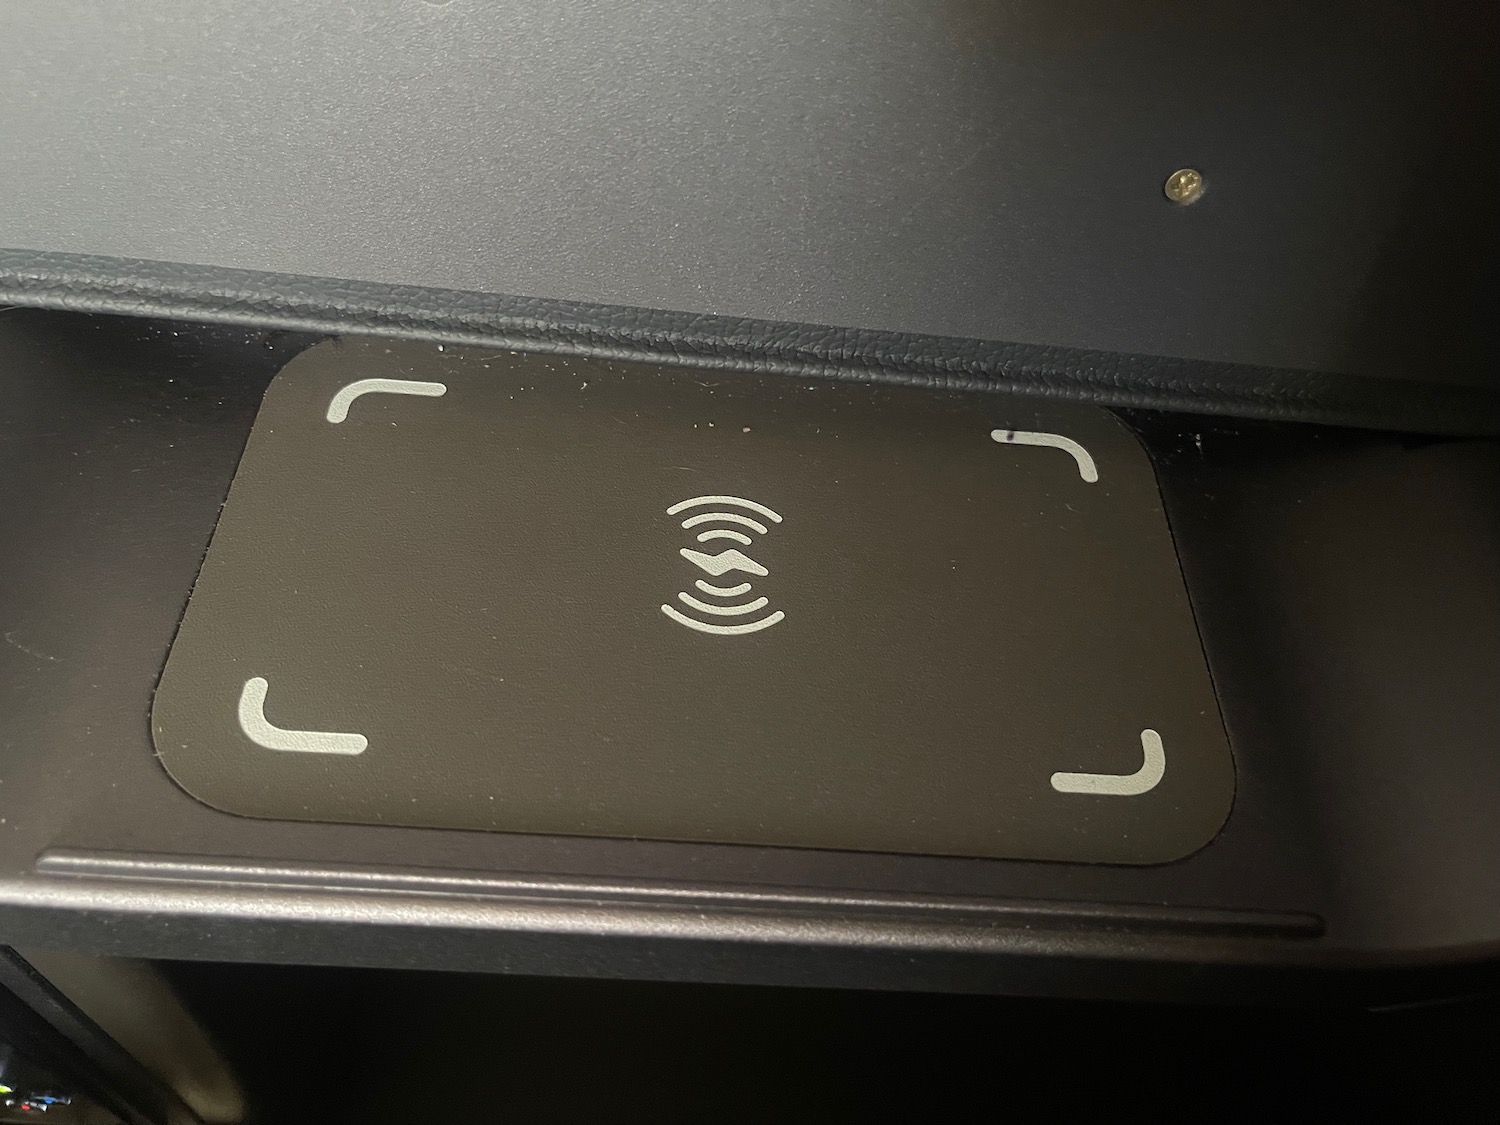 a wireless charging pad on a table